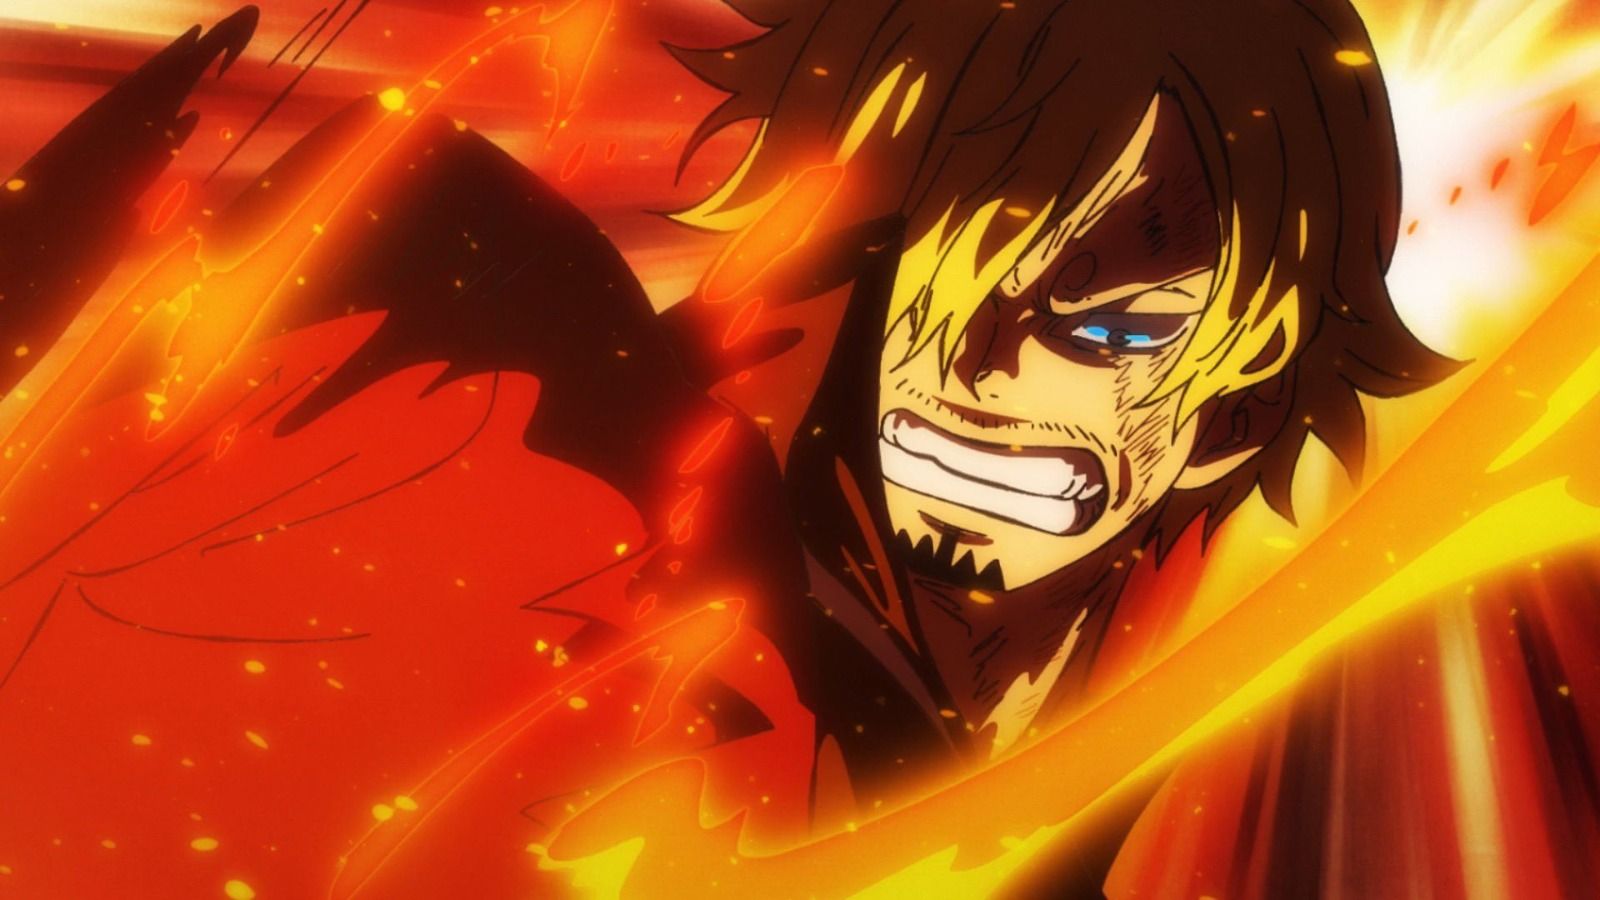 One Piece Episode 1057 Preview: Sanji and Zoro's Epic Battle for Luffy's Sake